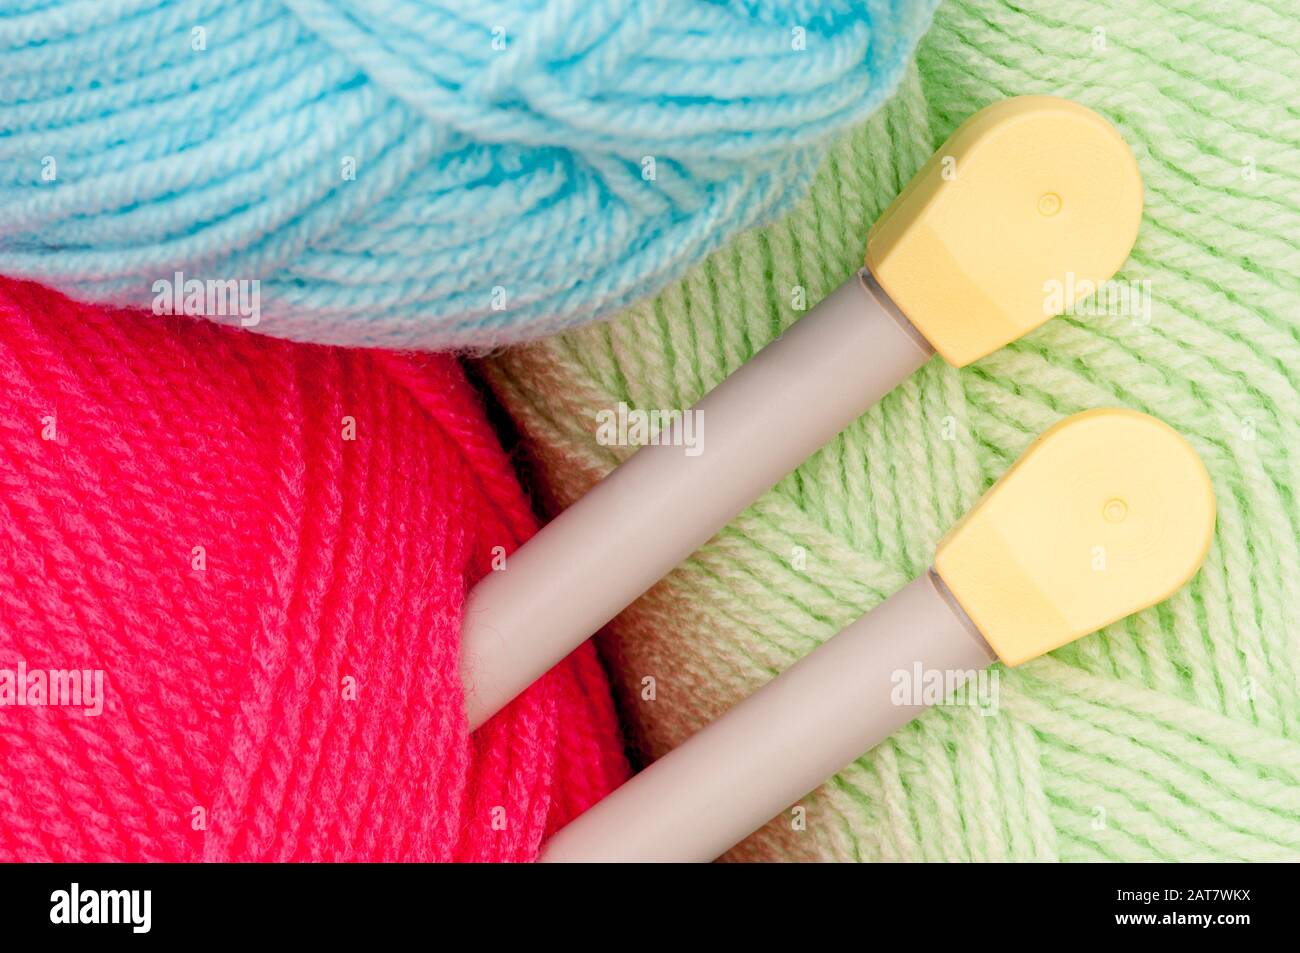 Balls of coloured wool with knitting needles Stock Photo